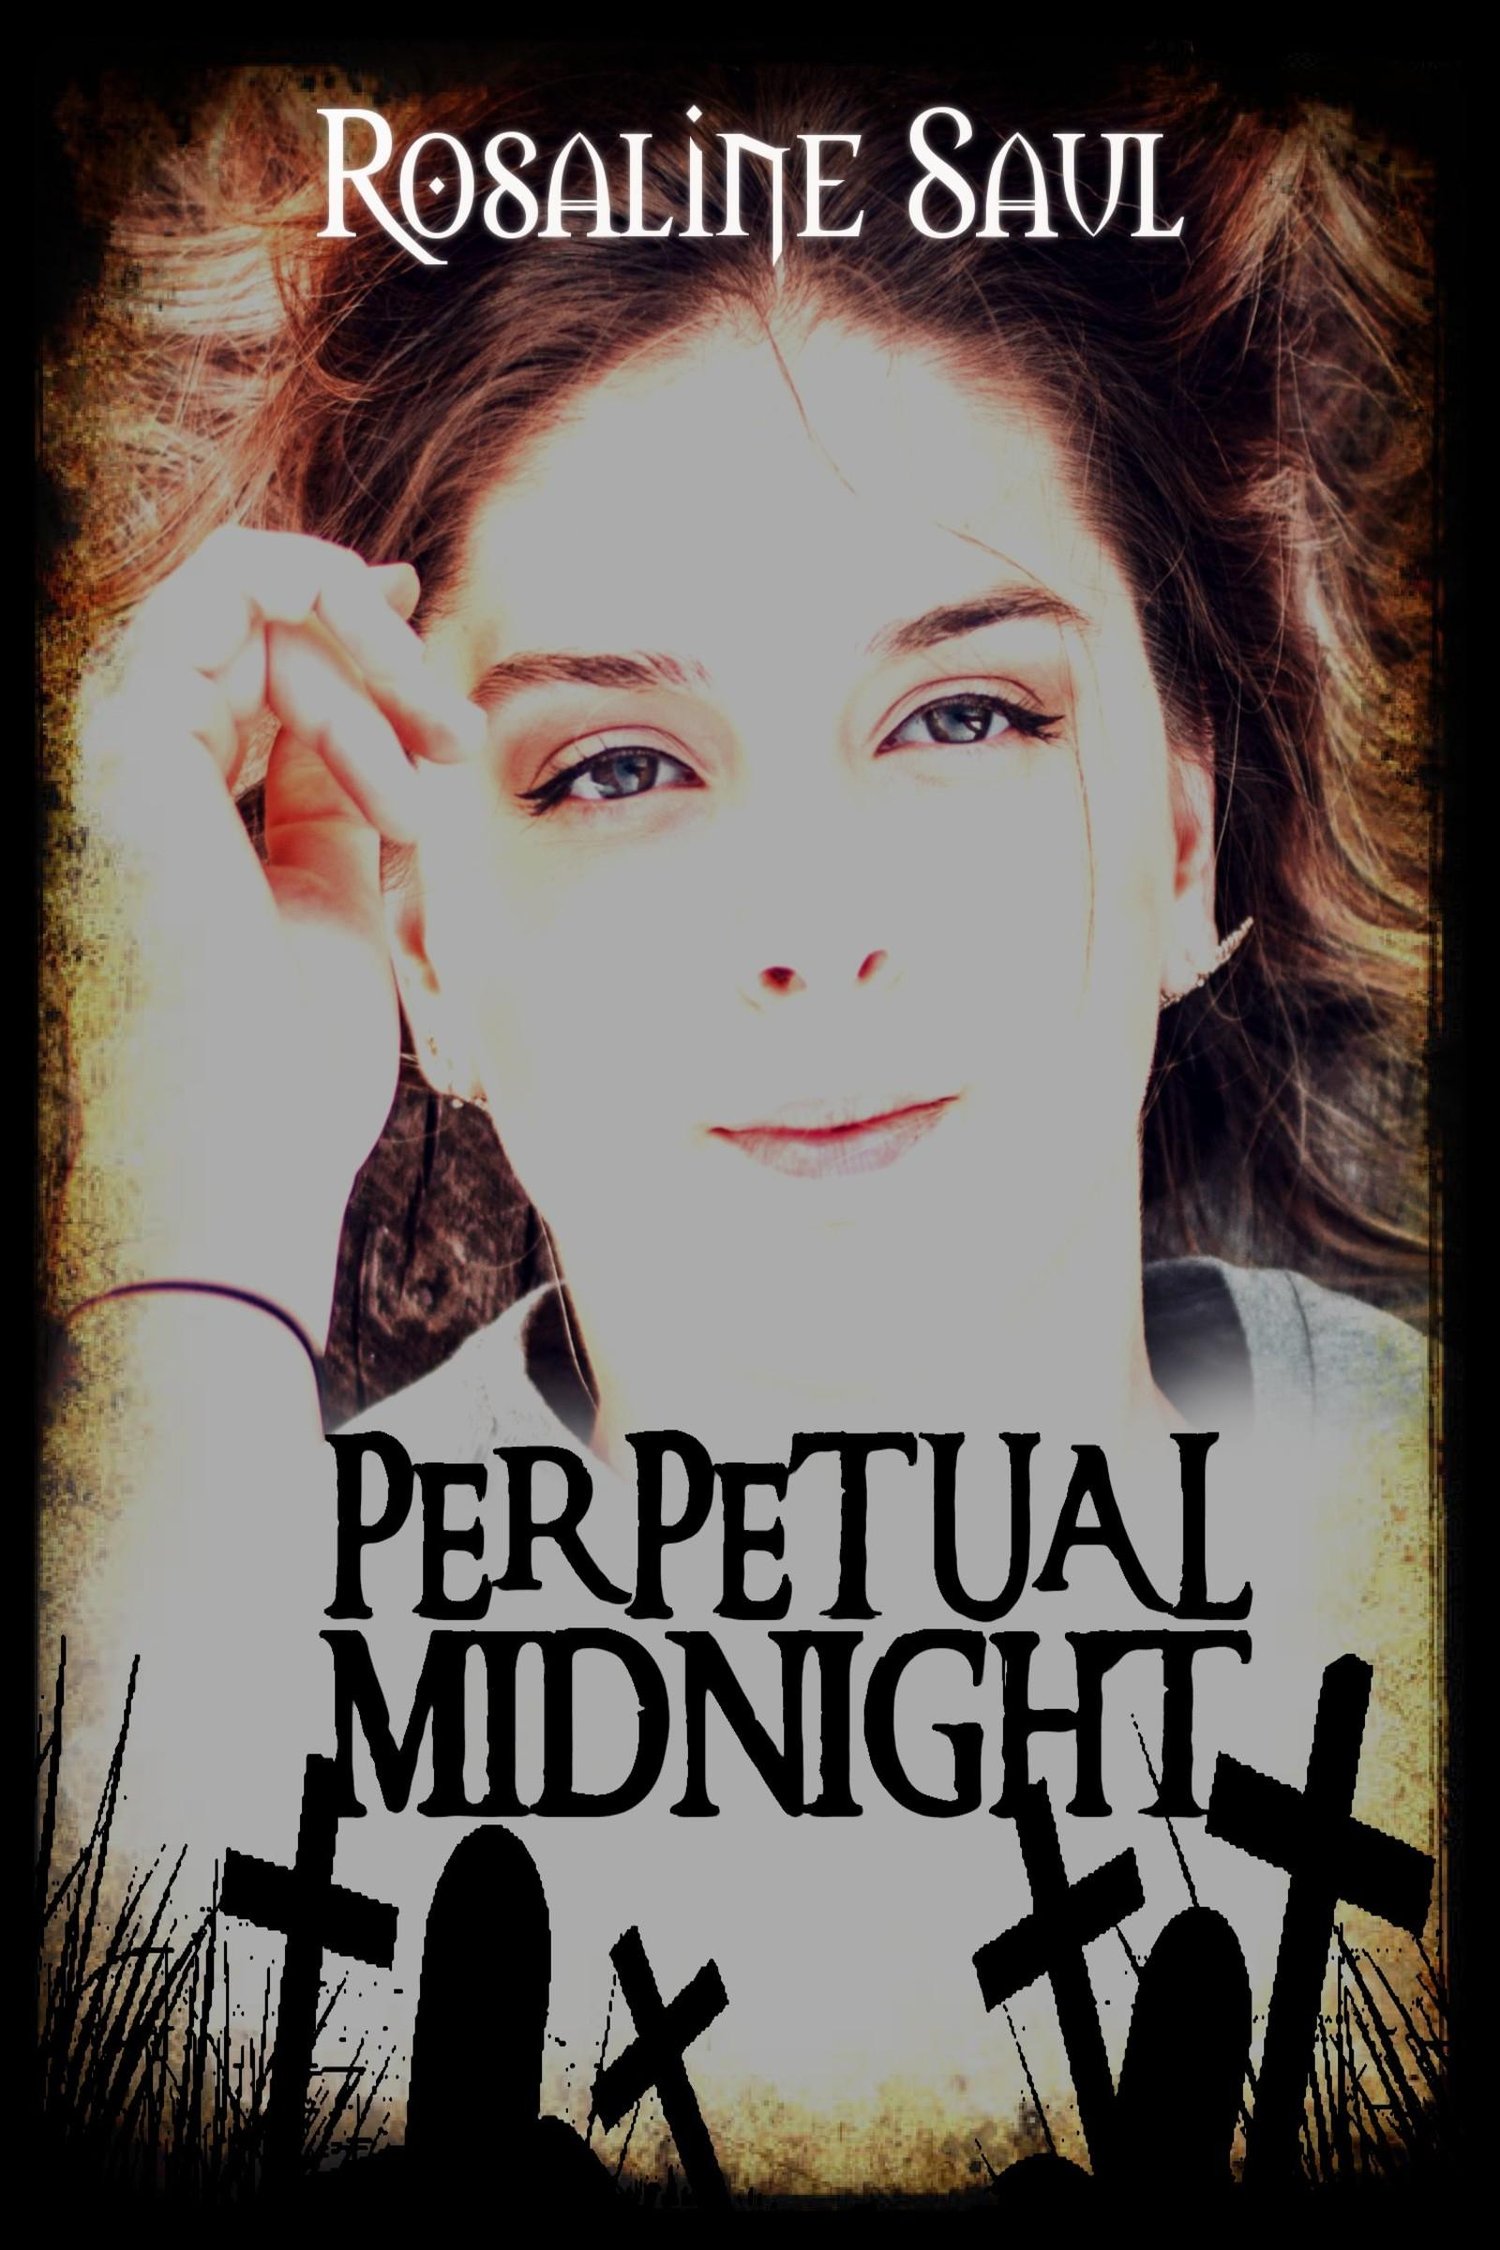 Perpetual Midnight by Rosaline Saul